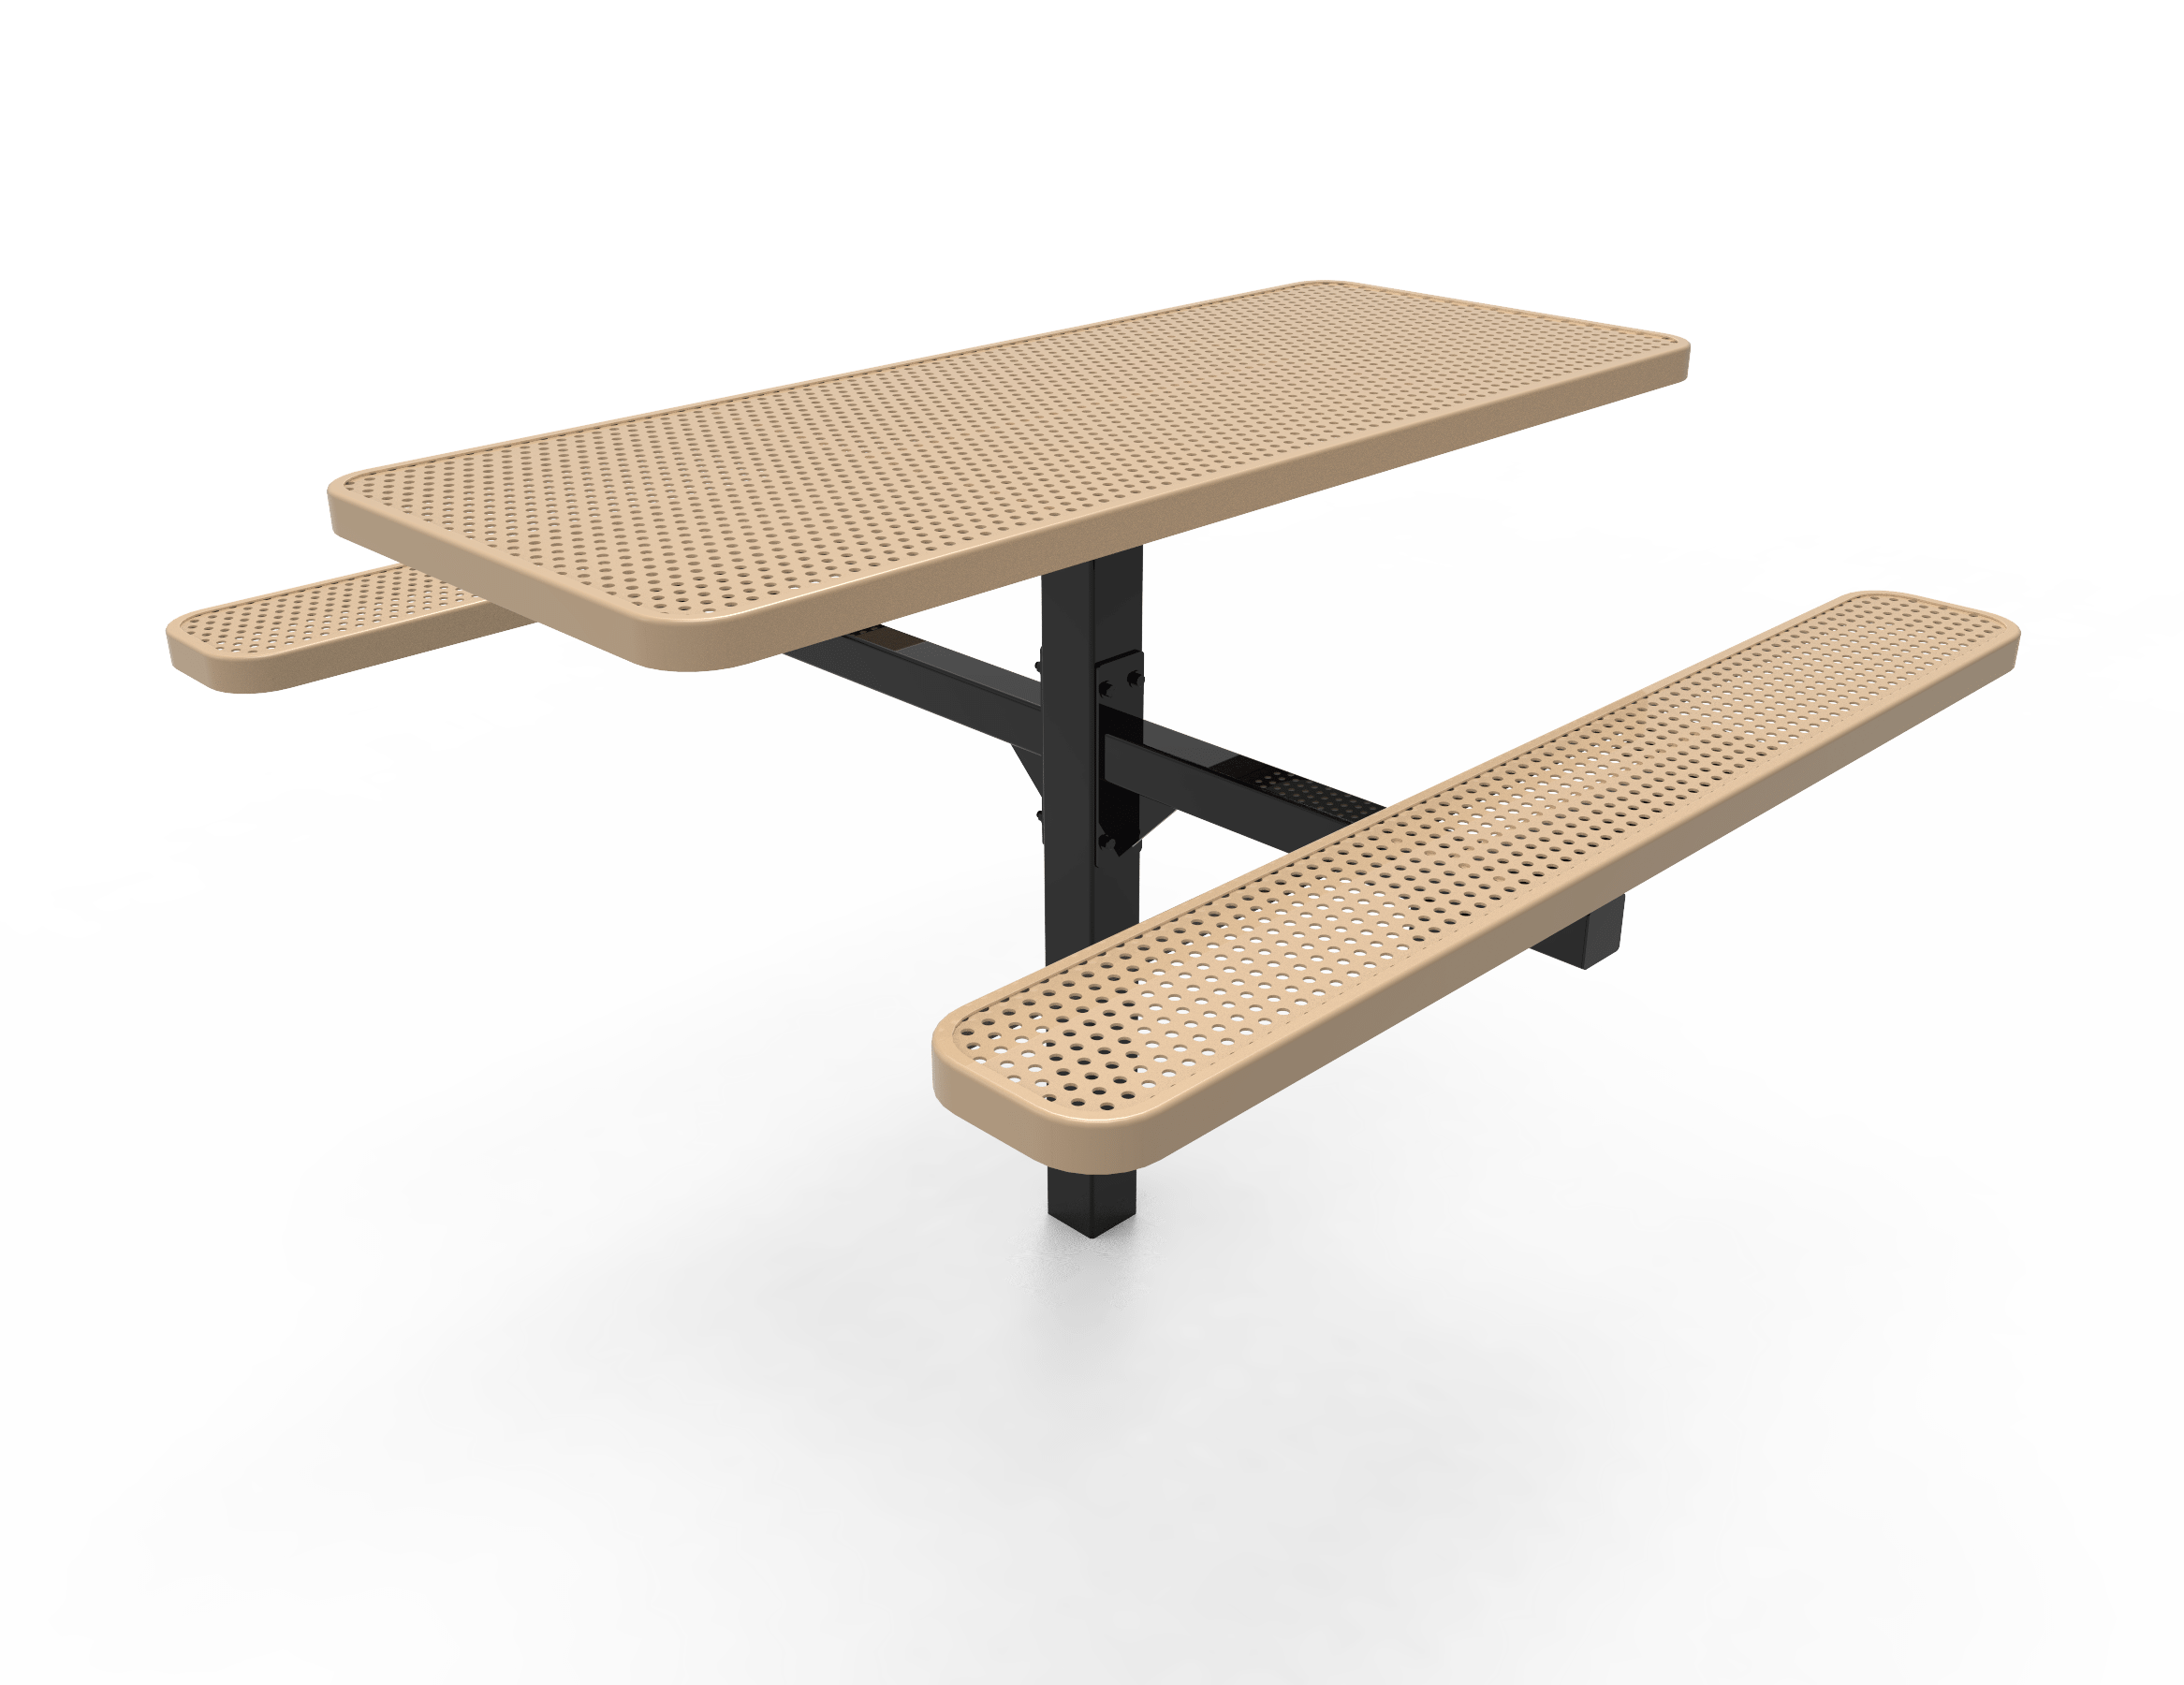 6′ Single Pedestal Picnic Table In Ground-Punched
TRT06-D-06-000
Industry Standard Finish
$1479.00
TRT06-B-06-000
Advantage Premium Finish
$1829.00
